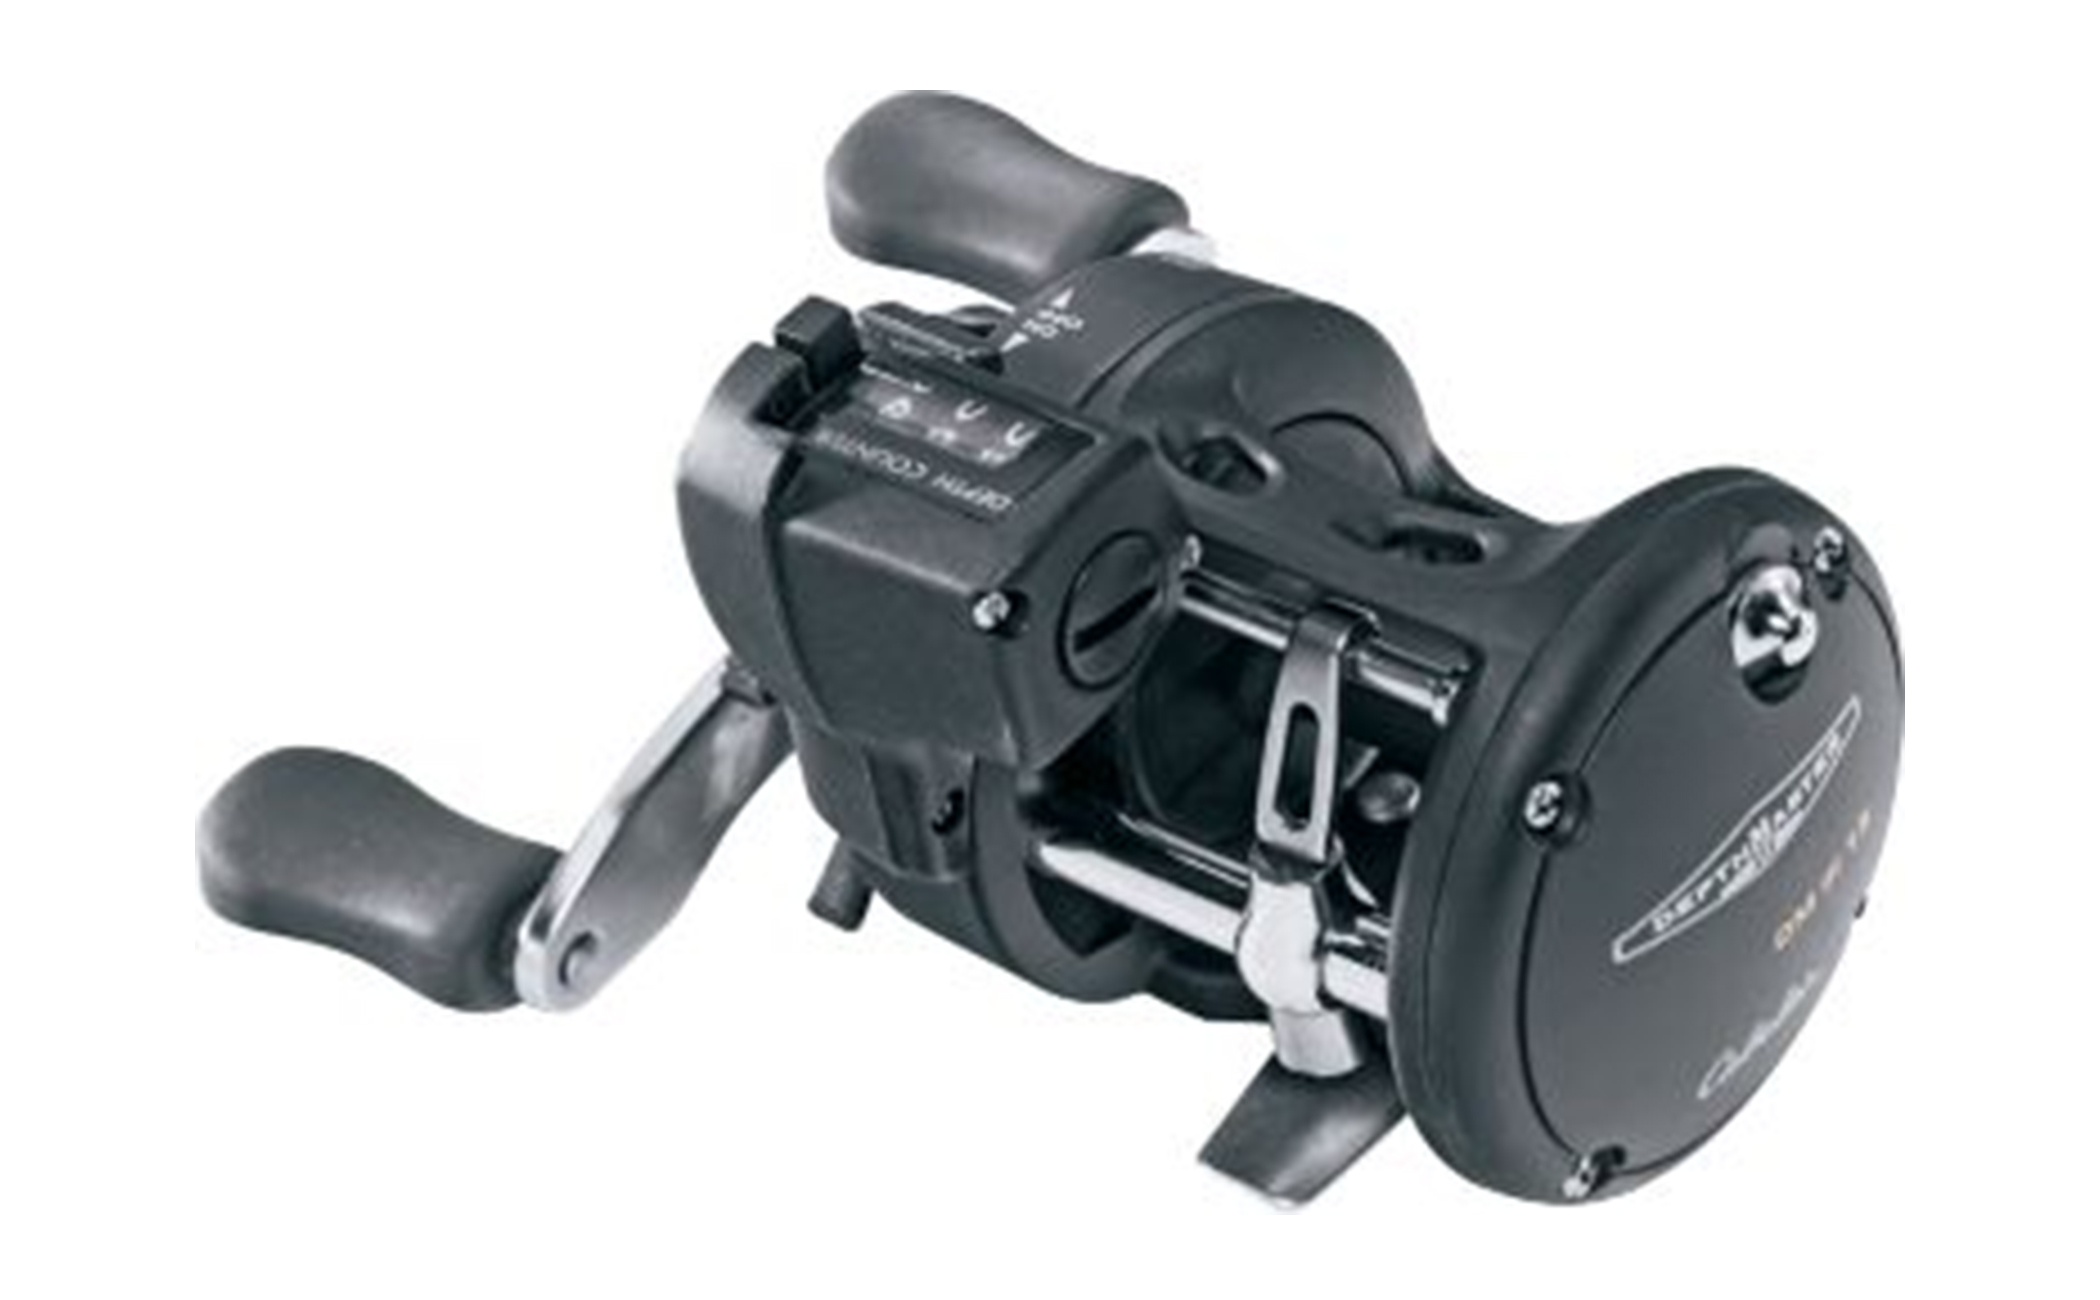 Rapala Defiant Dipsy Diver Trolling Reel and Rod Combo - Heavy